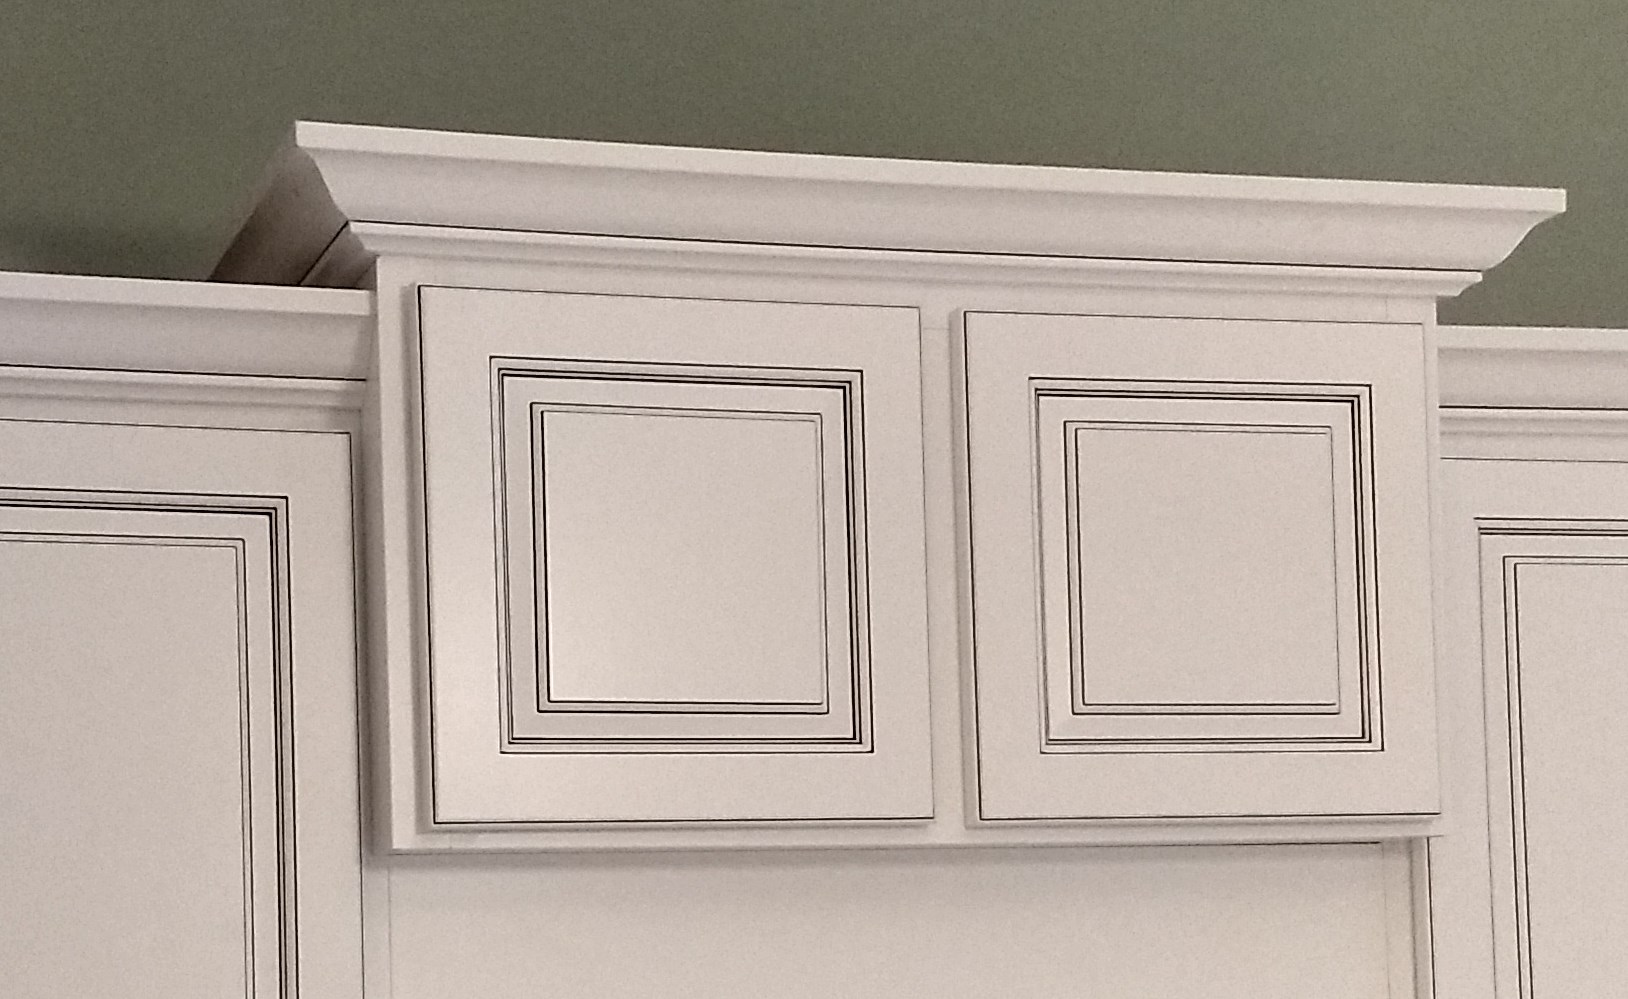 Step 8: The center cabinet has been refaced and the new crown molding wraps around and returns to the wall